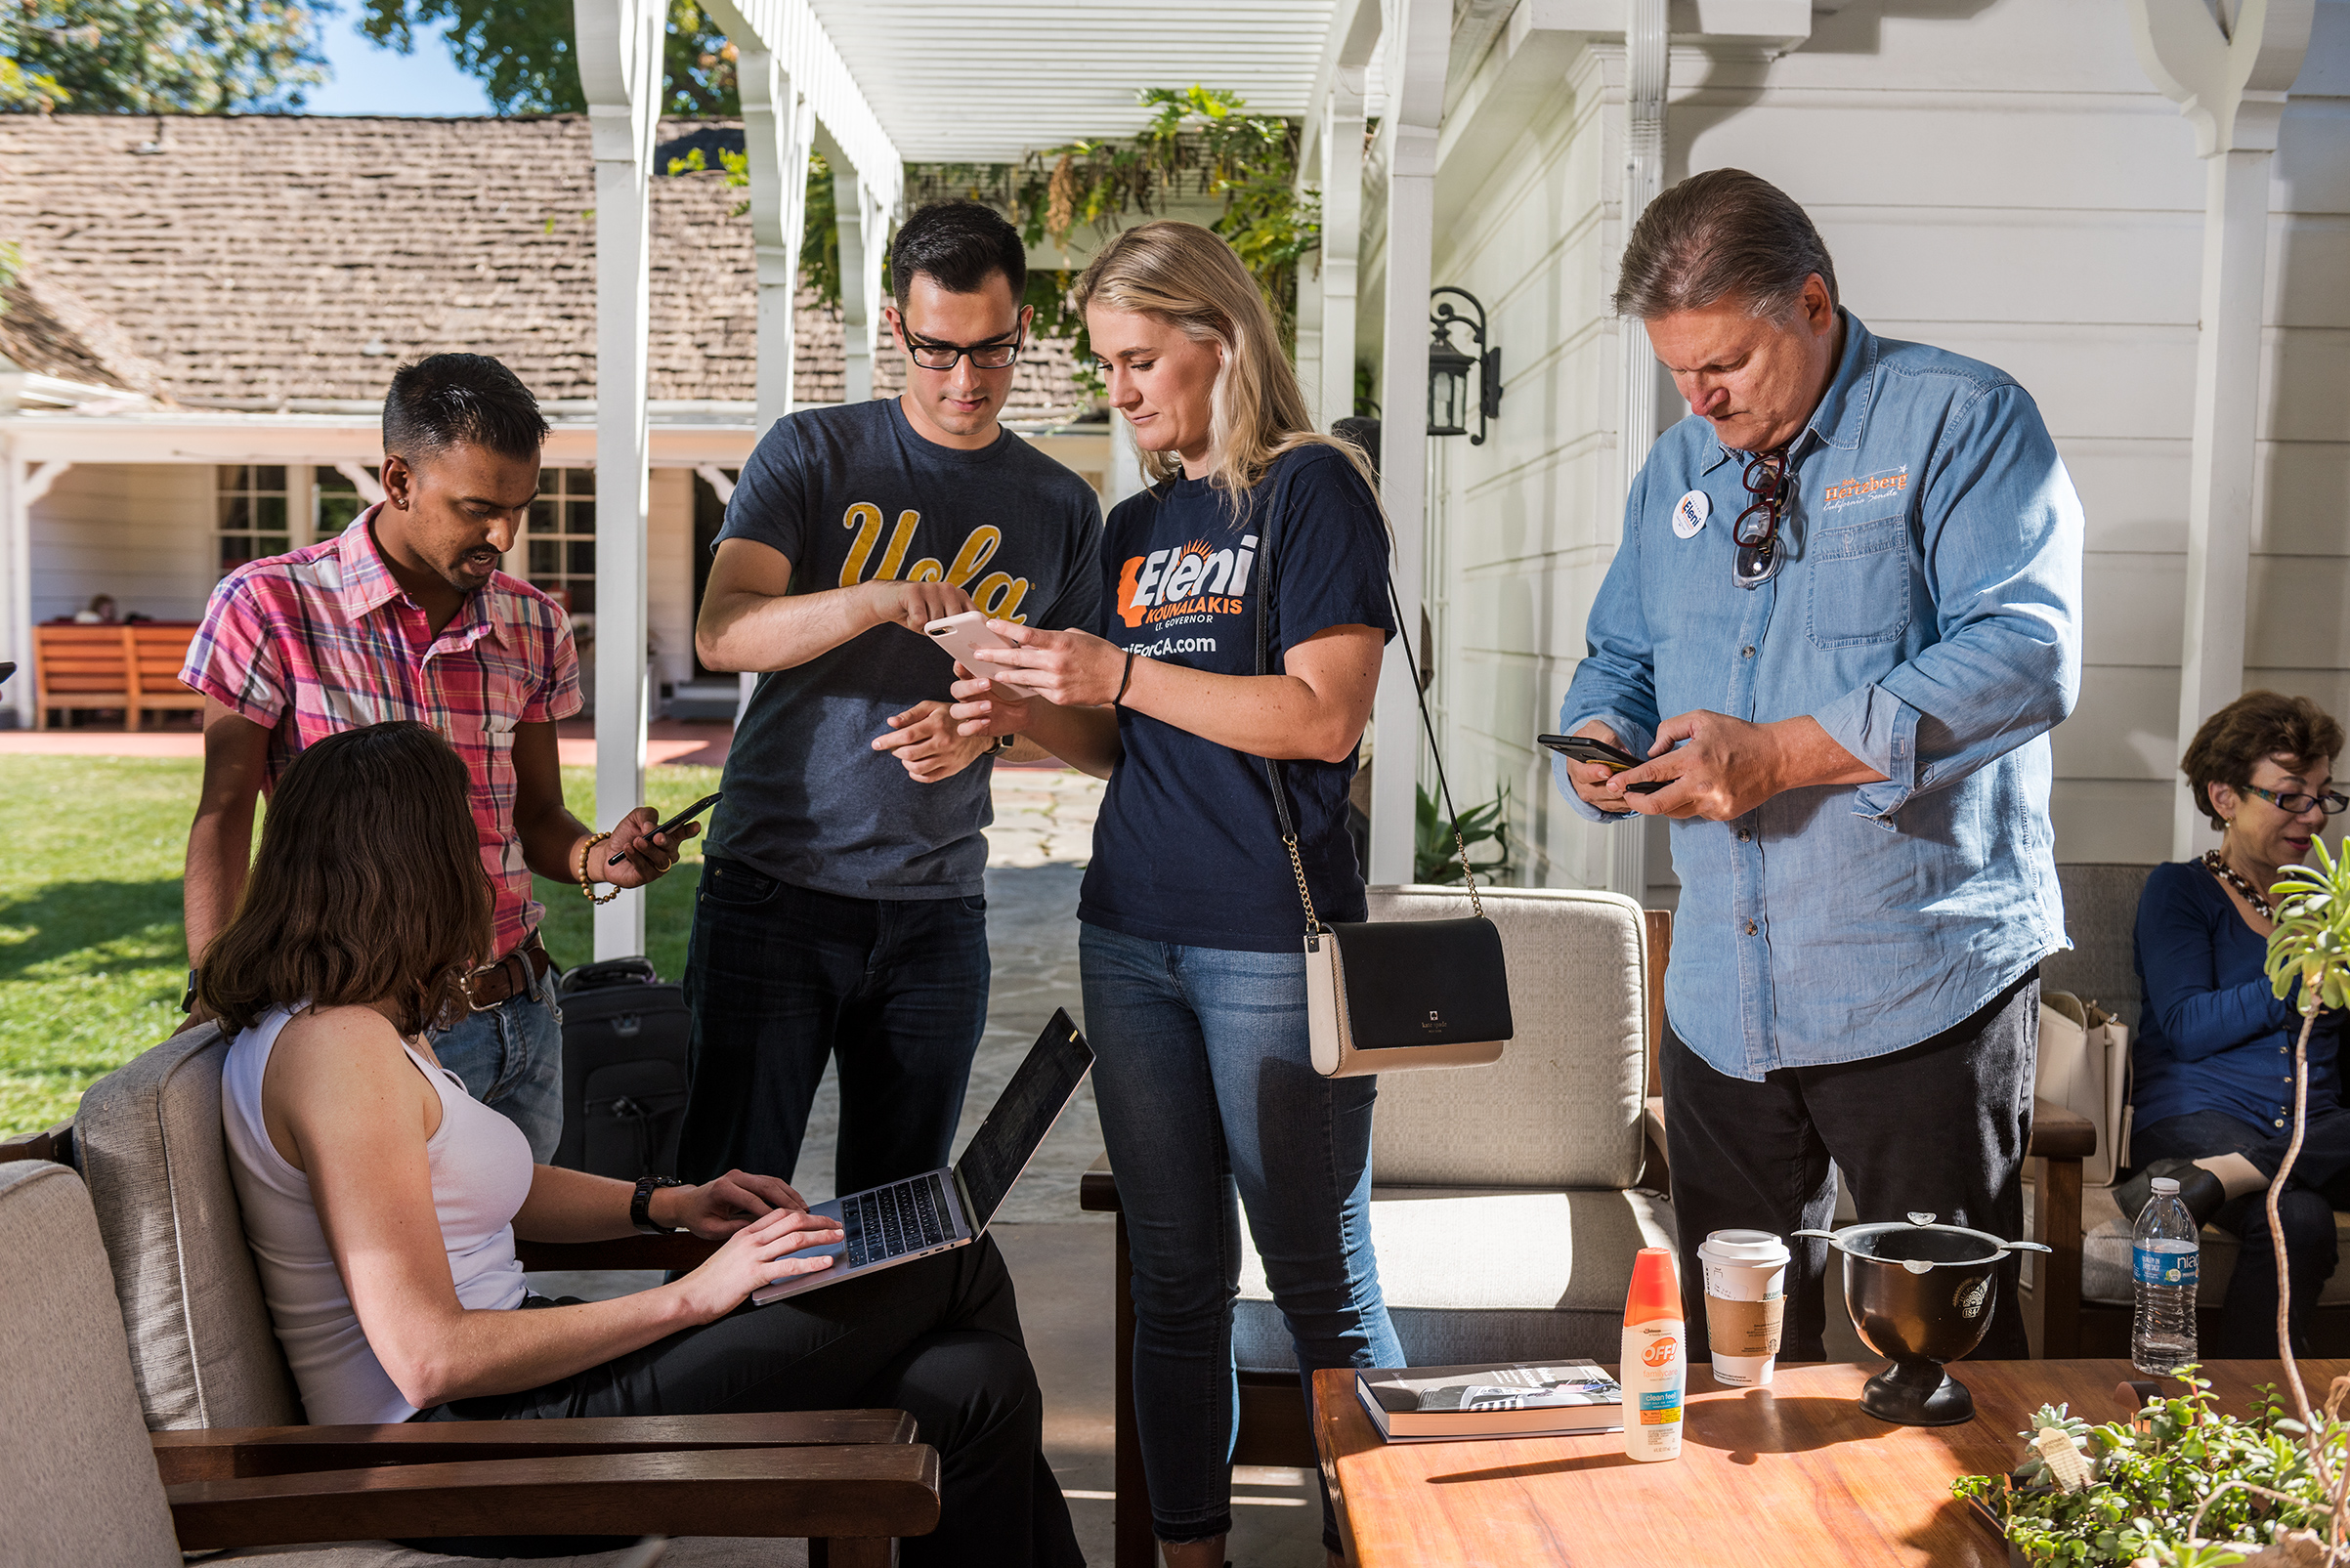 Volunteers attend a political "text bank" for California lieutenant governor candidate Eleni Kounalakis in Van Nuys, Calif., at the home of state Senator Robert Hertzberg on Oct. 20, 2018. (Damon Casarez for TIME)